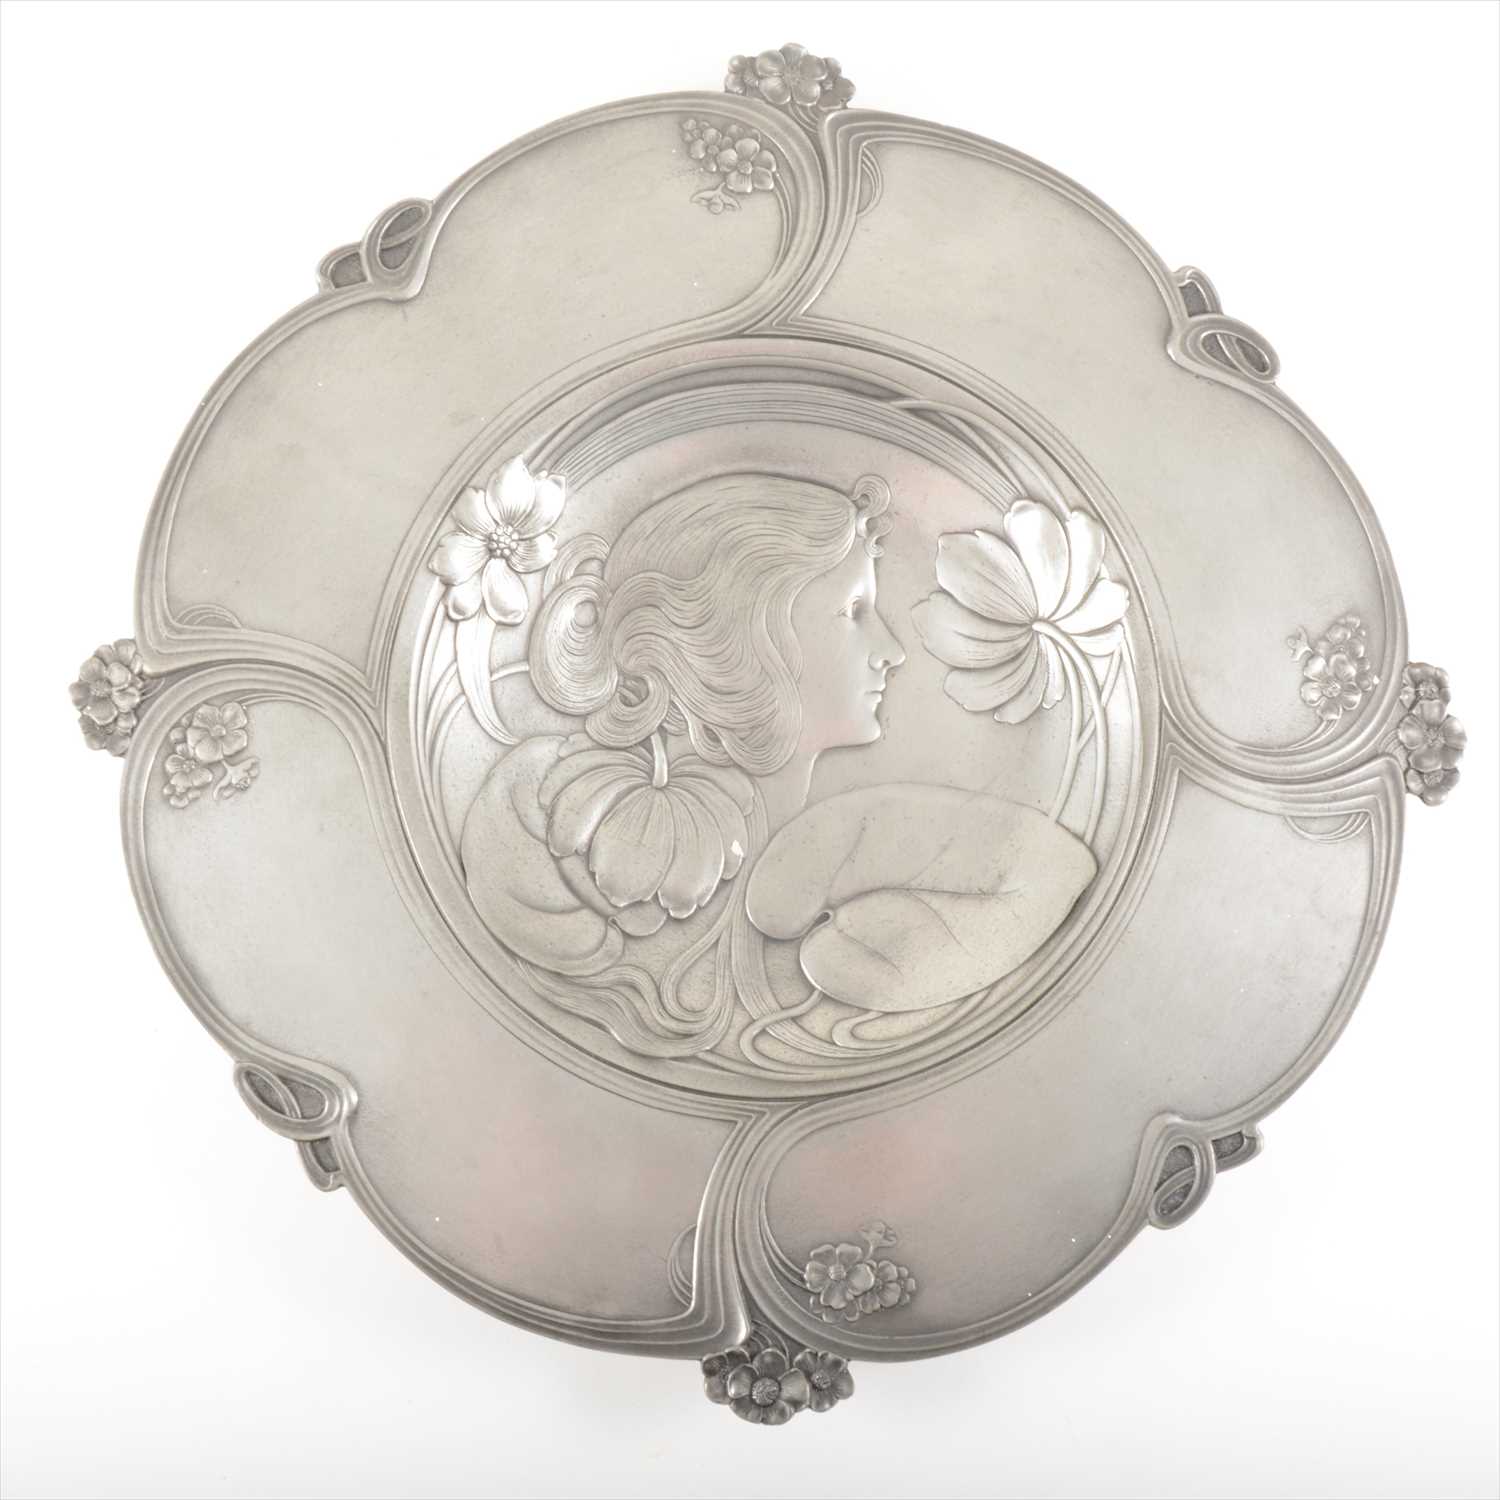 Lot 91 - An Italian Art Nouveau pewter charger, by Achille Gamba.